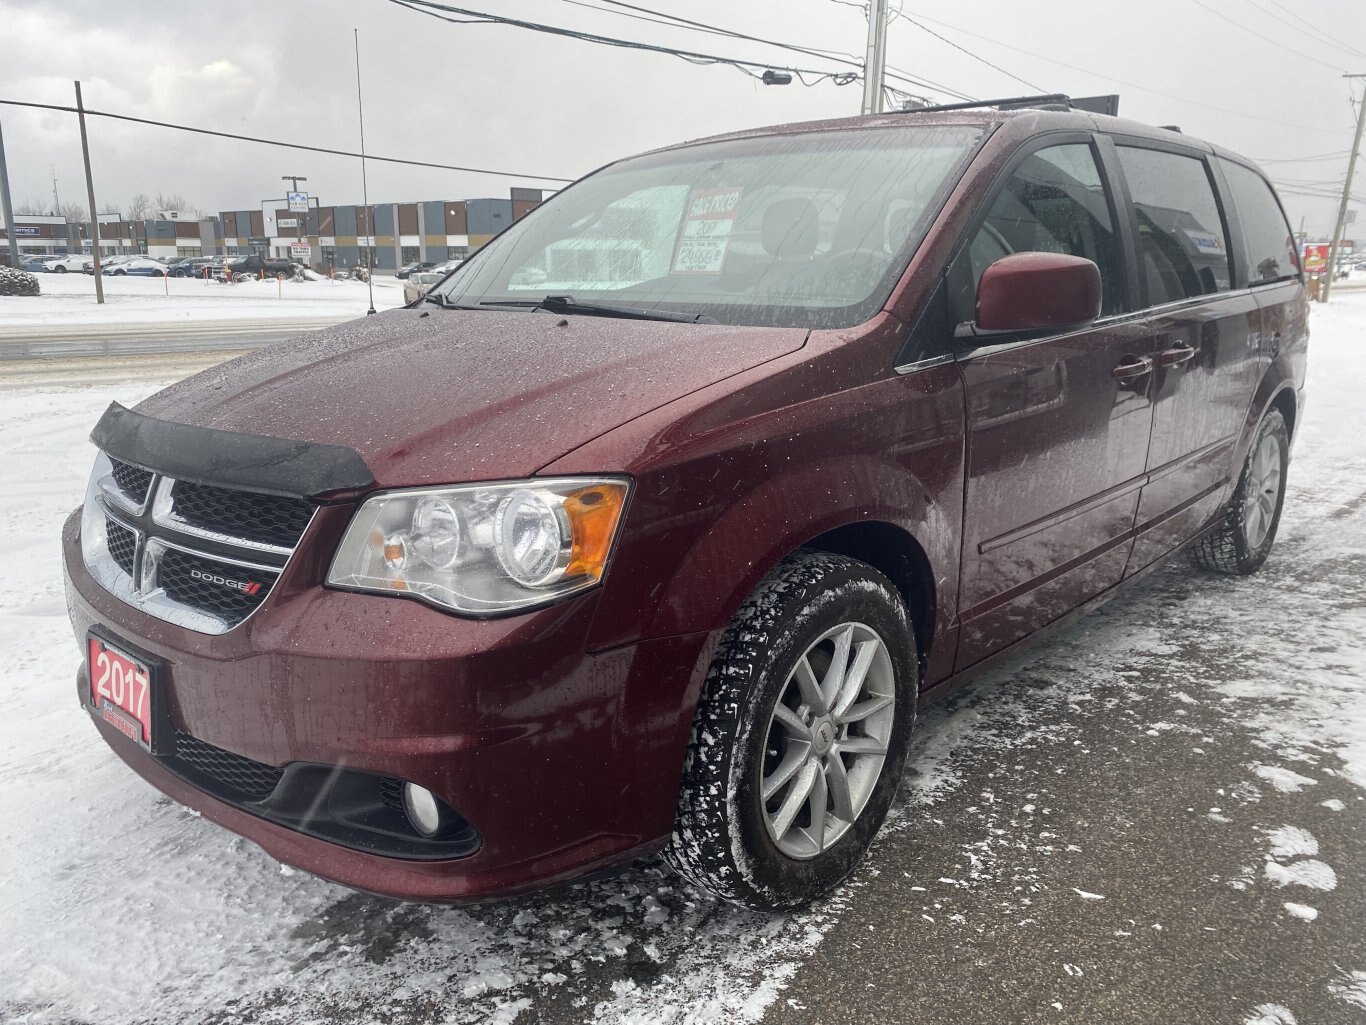 2017 DODGE GRAND CARAVAN SXT FRONT WHEEL DRIVE W/LEATHER SEATS, REMOTE START, STOW & GO, REAR VIEW CAMERA AND DVD PLAYER!